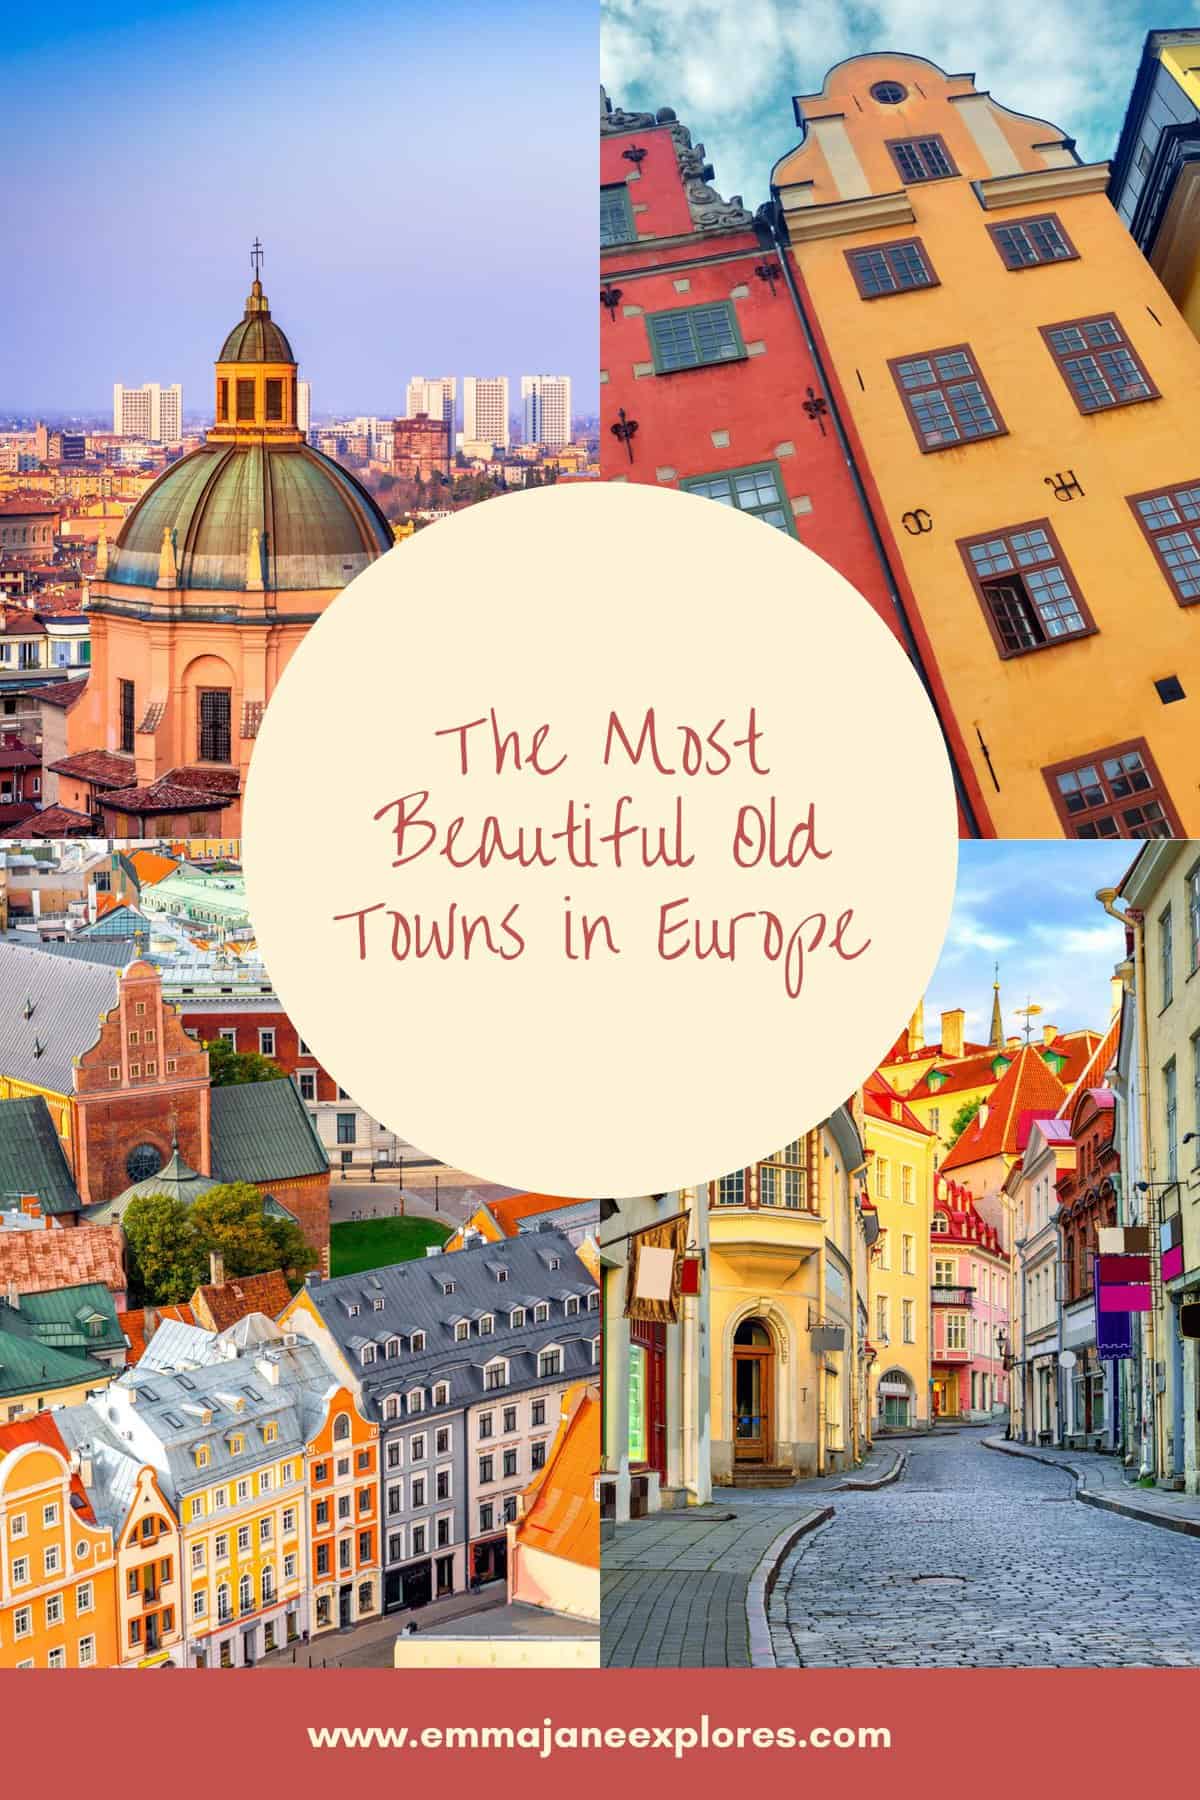 The Most Beautiful Old Towns In Europe - Emma Jane Explores